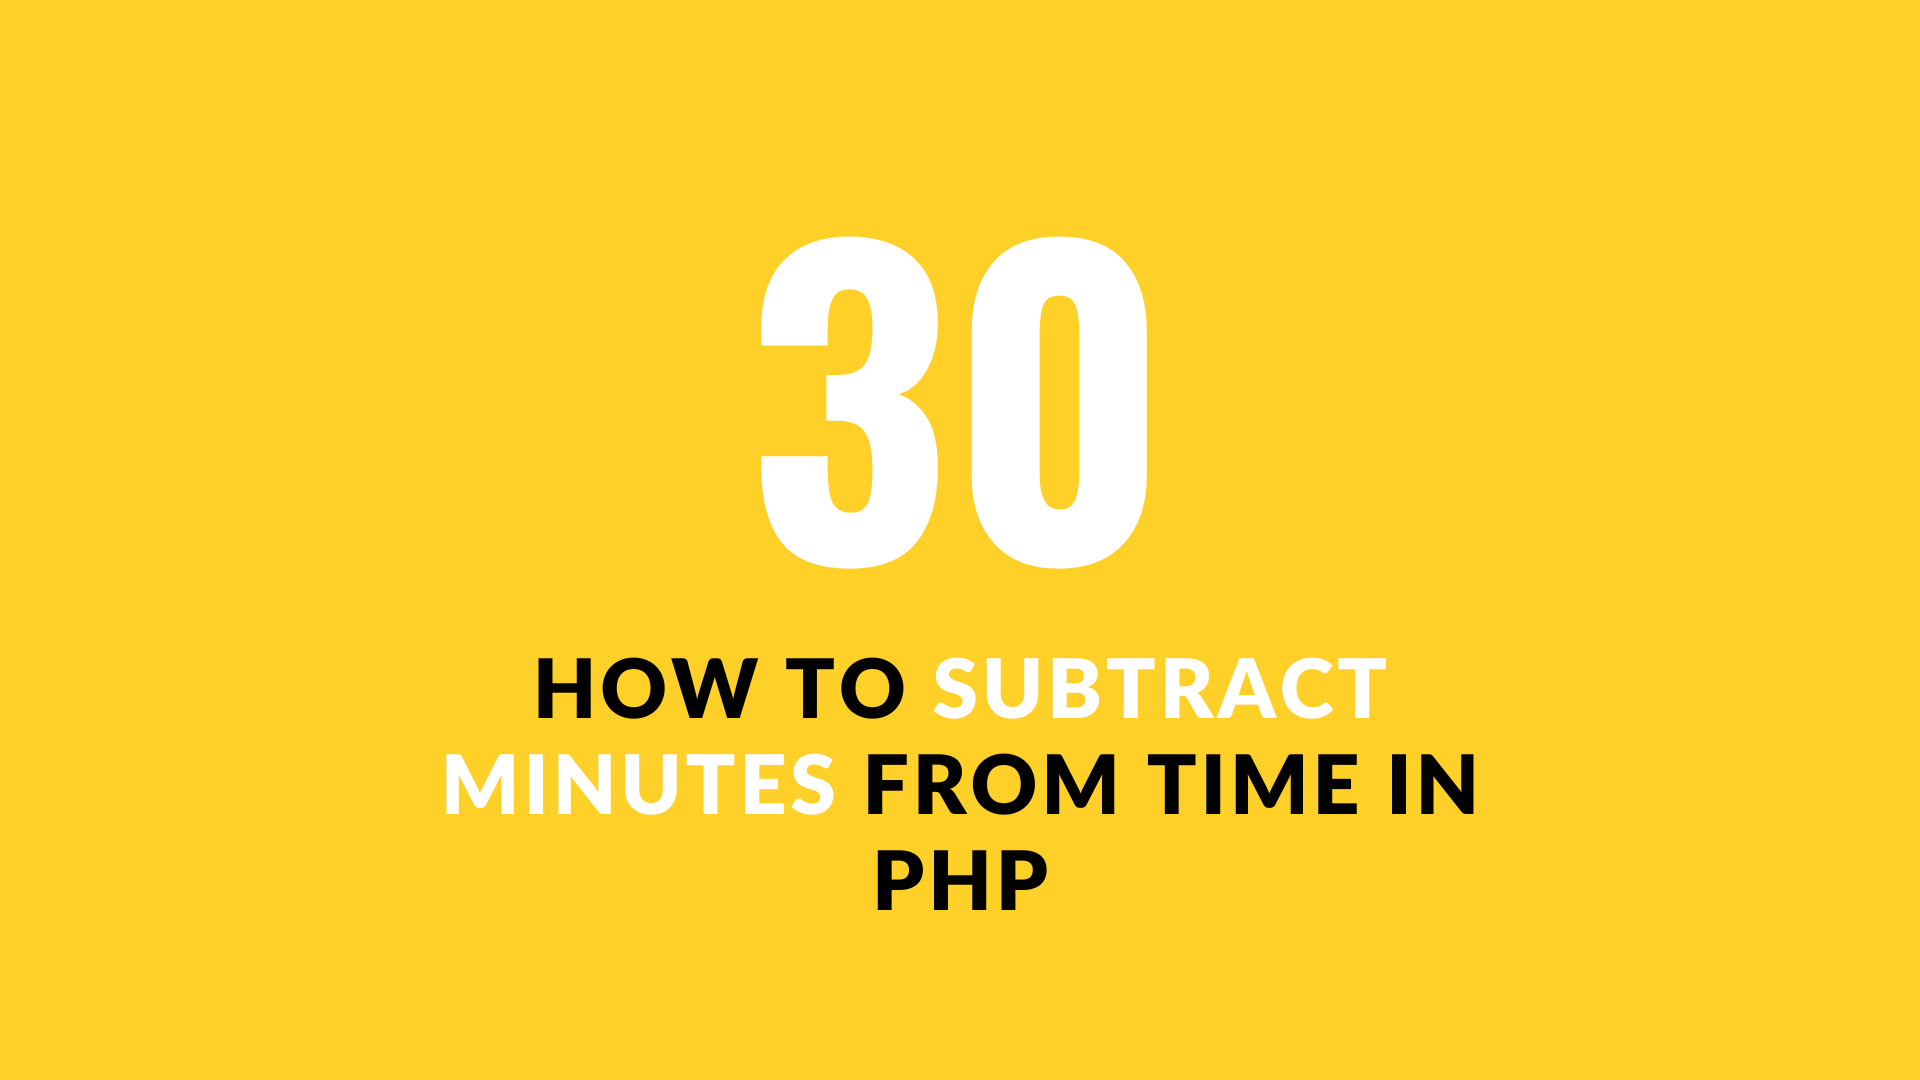 How to subtract minutes from time in PHP